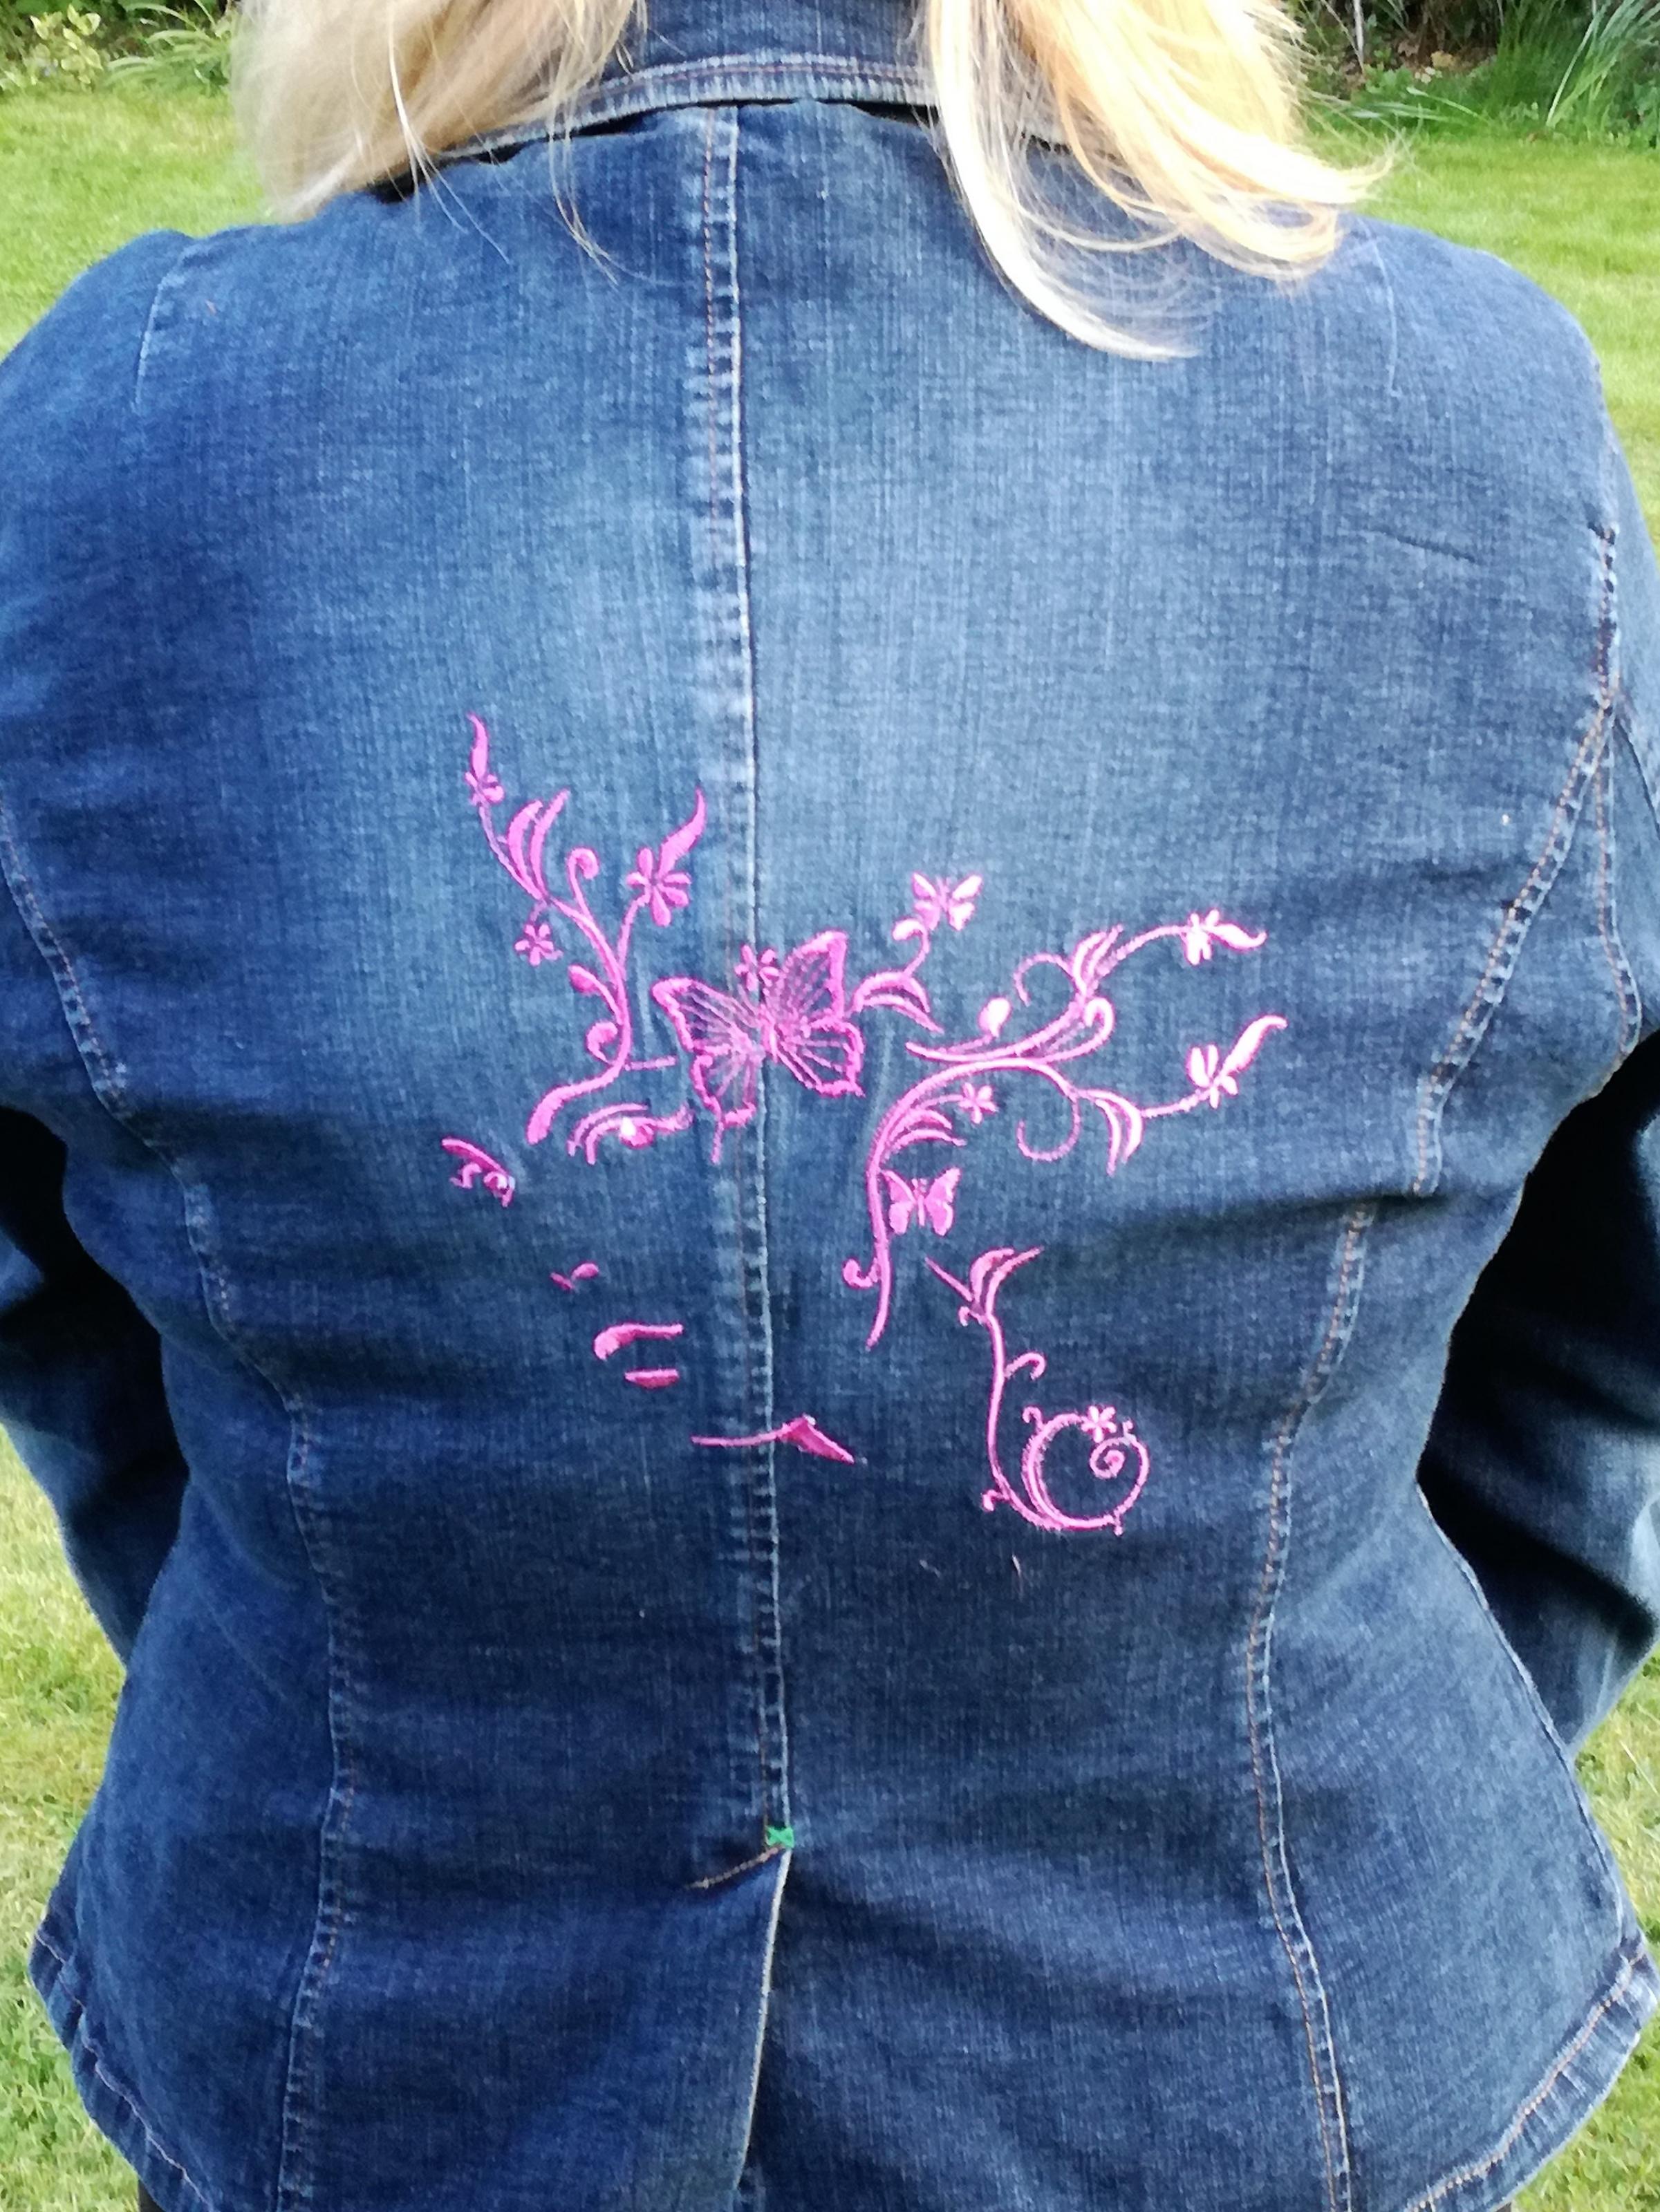 Woman and Butterfly free embroidery design on denim Jacket